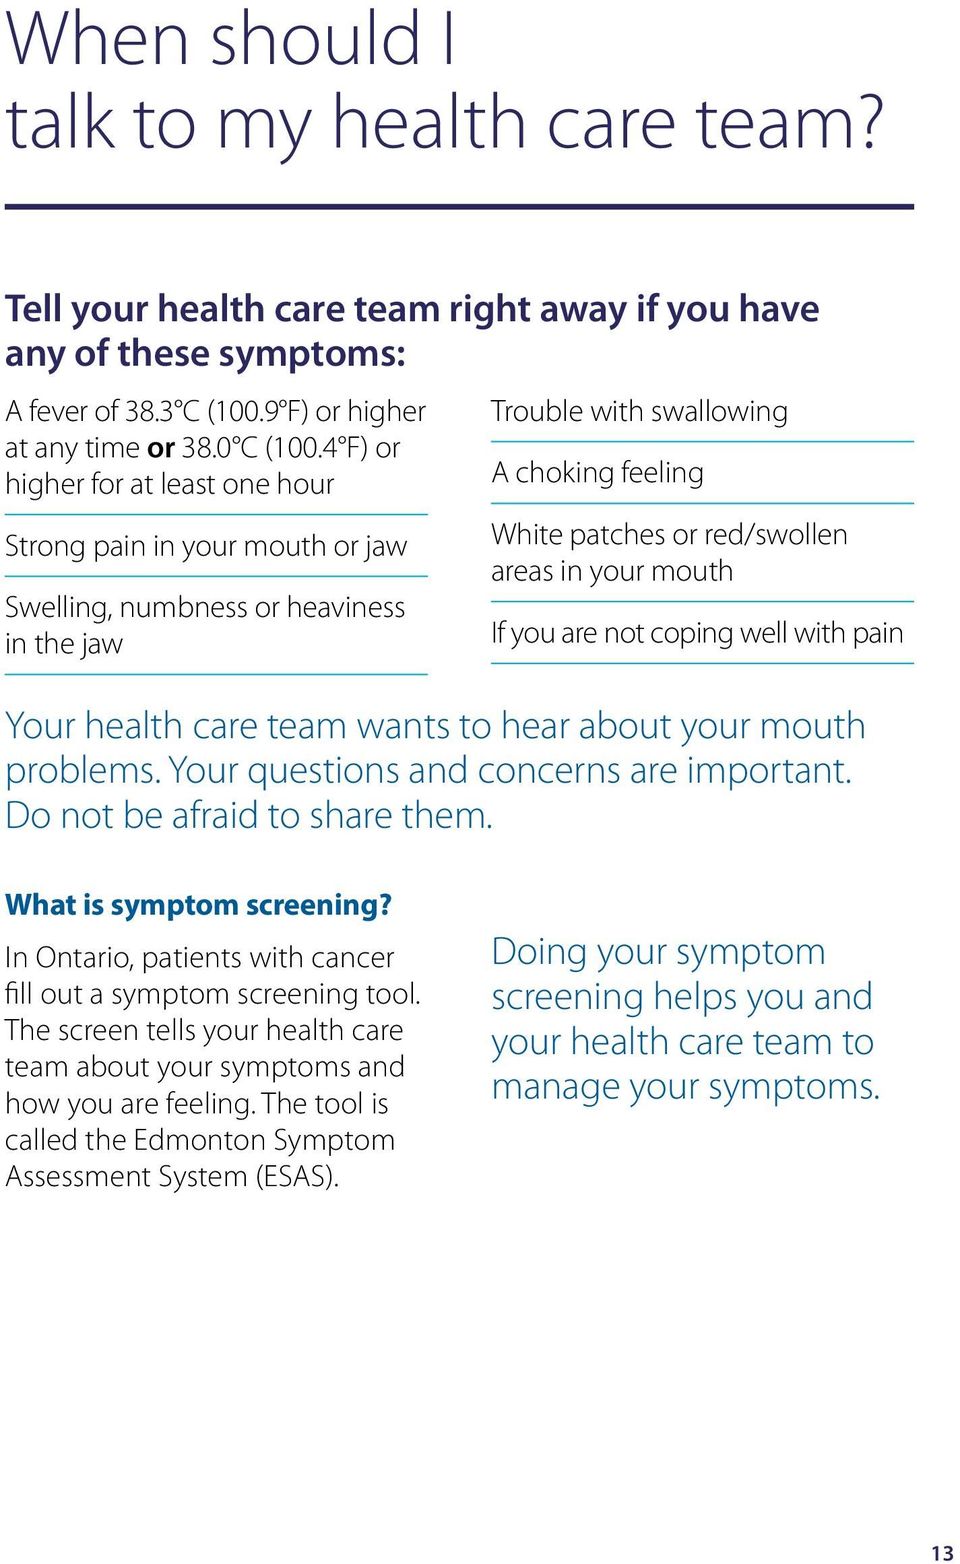 mouth If you are not coping well with pain Your health care team wants to hear about your mouth problems. Your questions and concerns are important. Do not be afraid to share them.